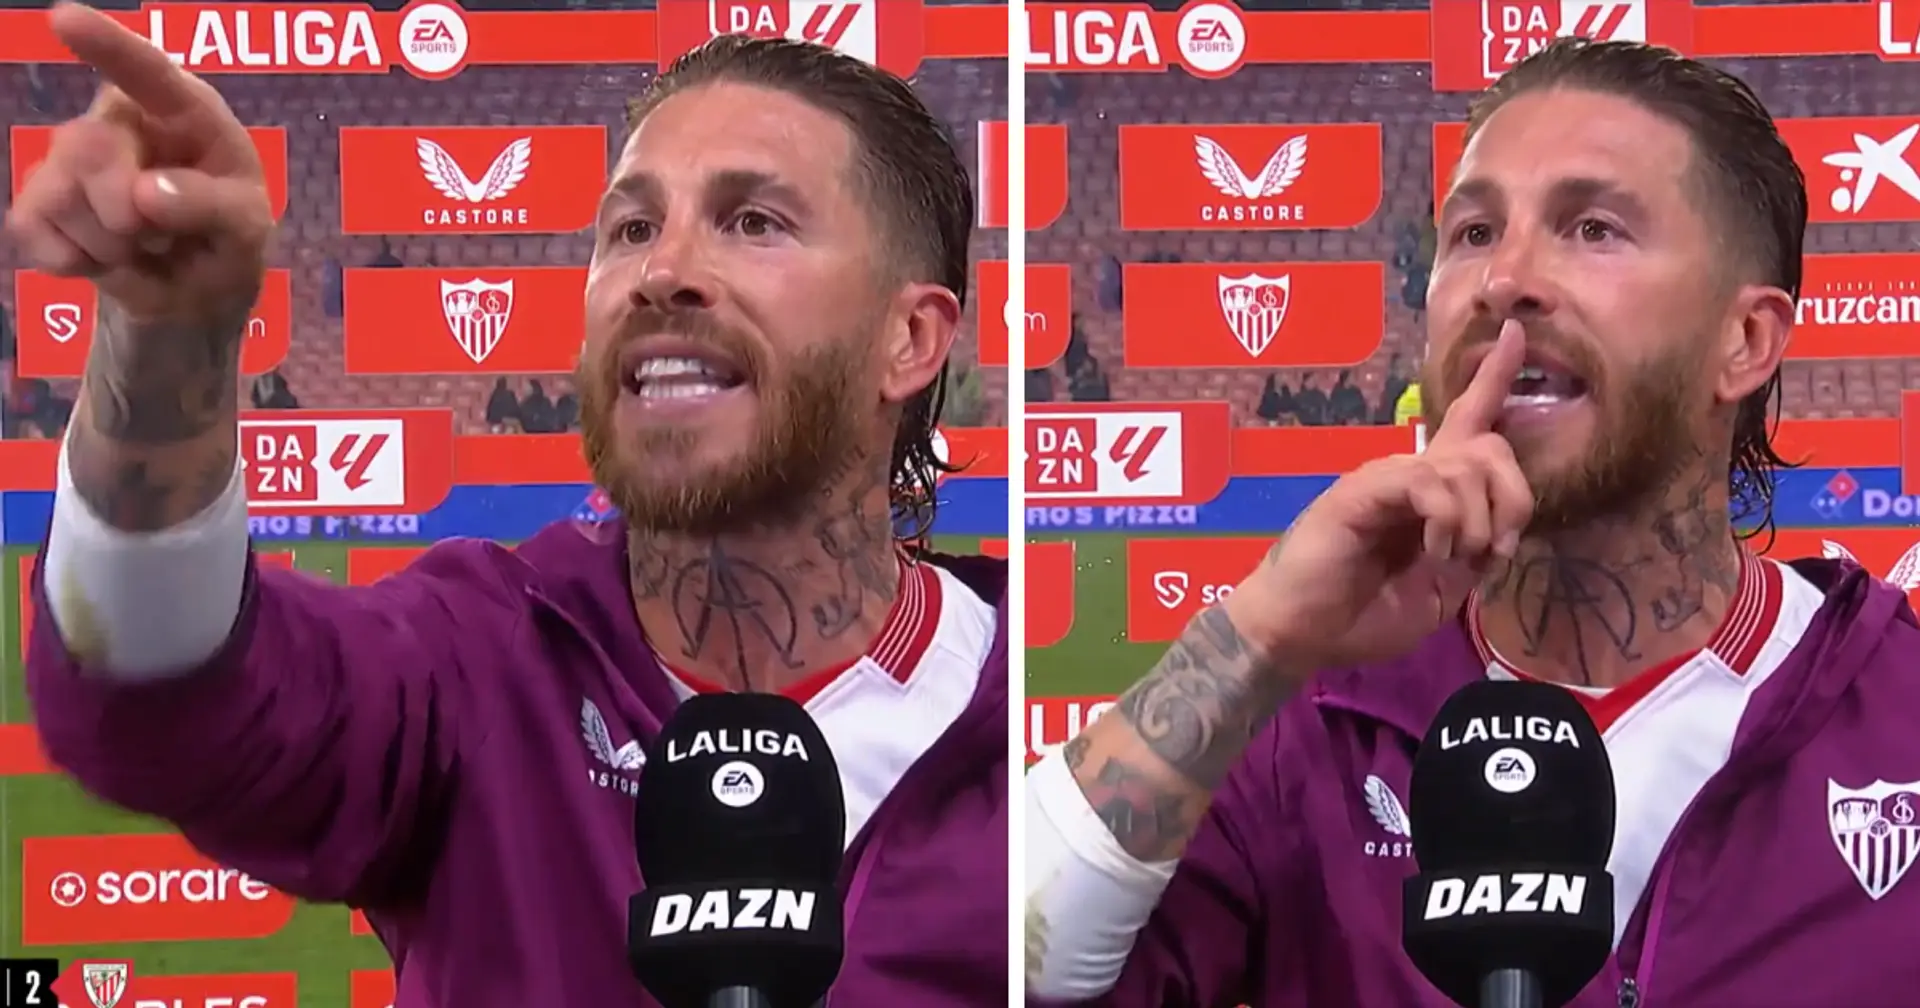 'Shut up and go!': Sergio Ramos stops post-match interview to argue with a fan